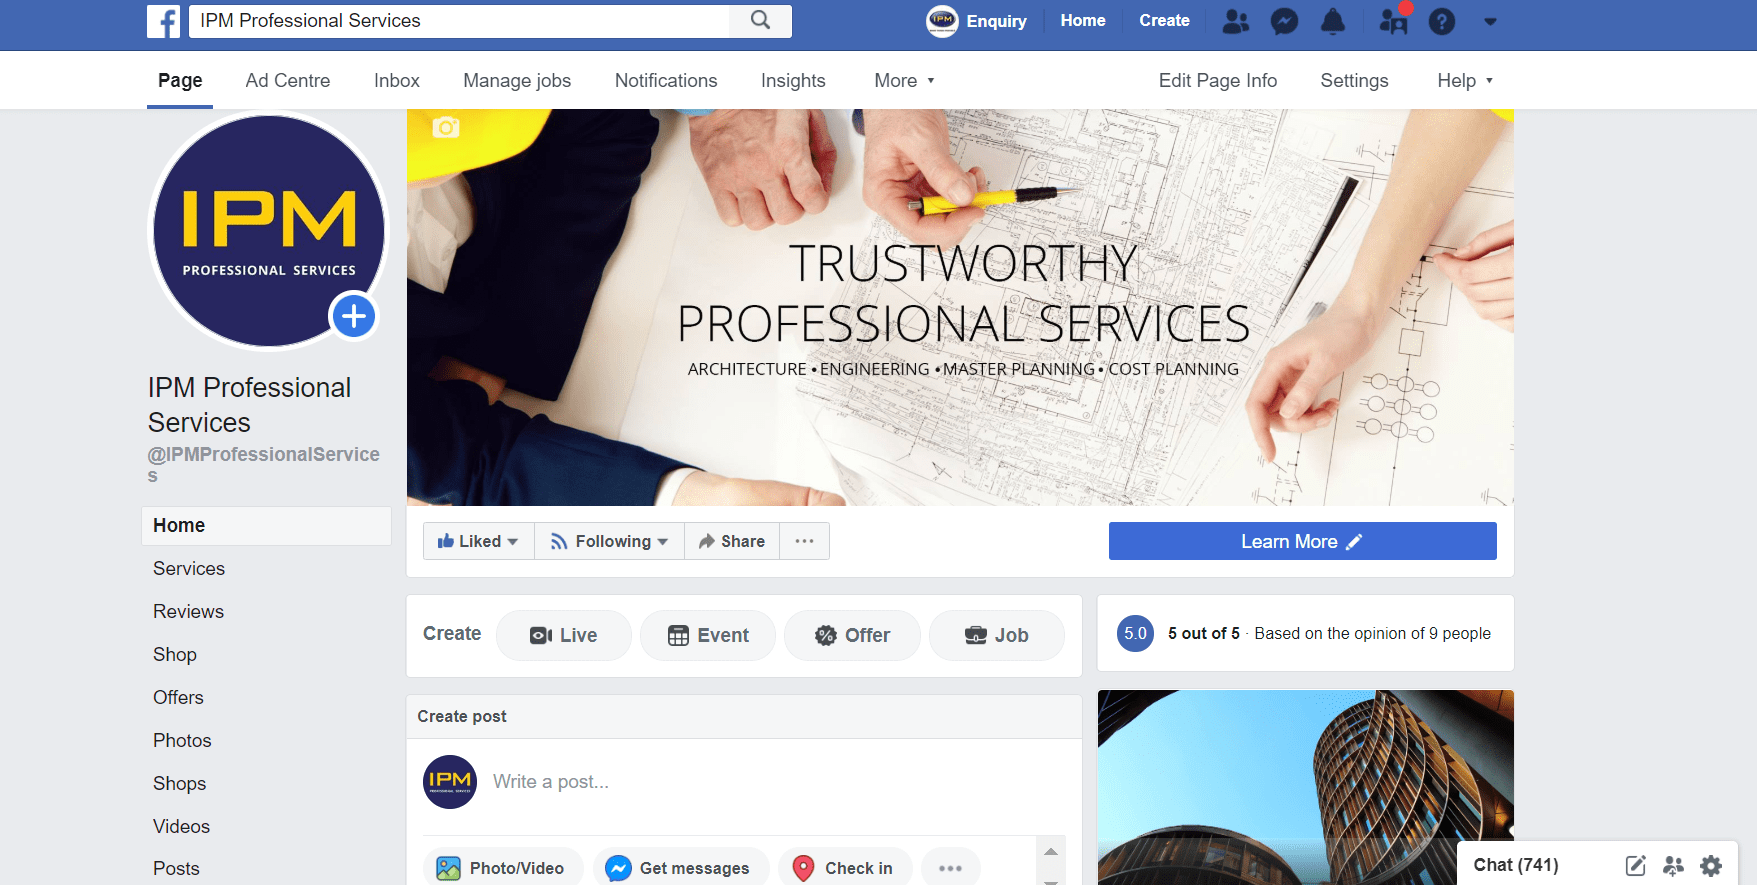 Rebranding of Facebook Page Name “IPM Professional Services”